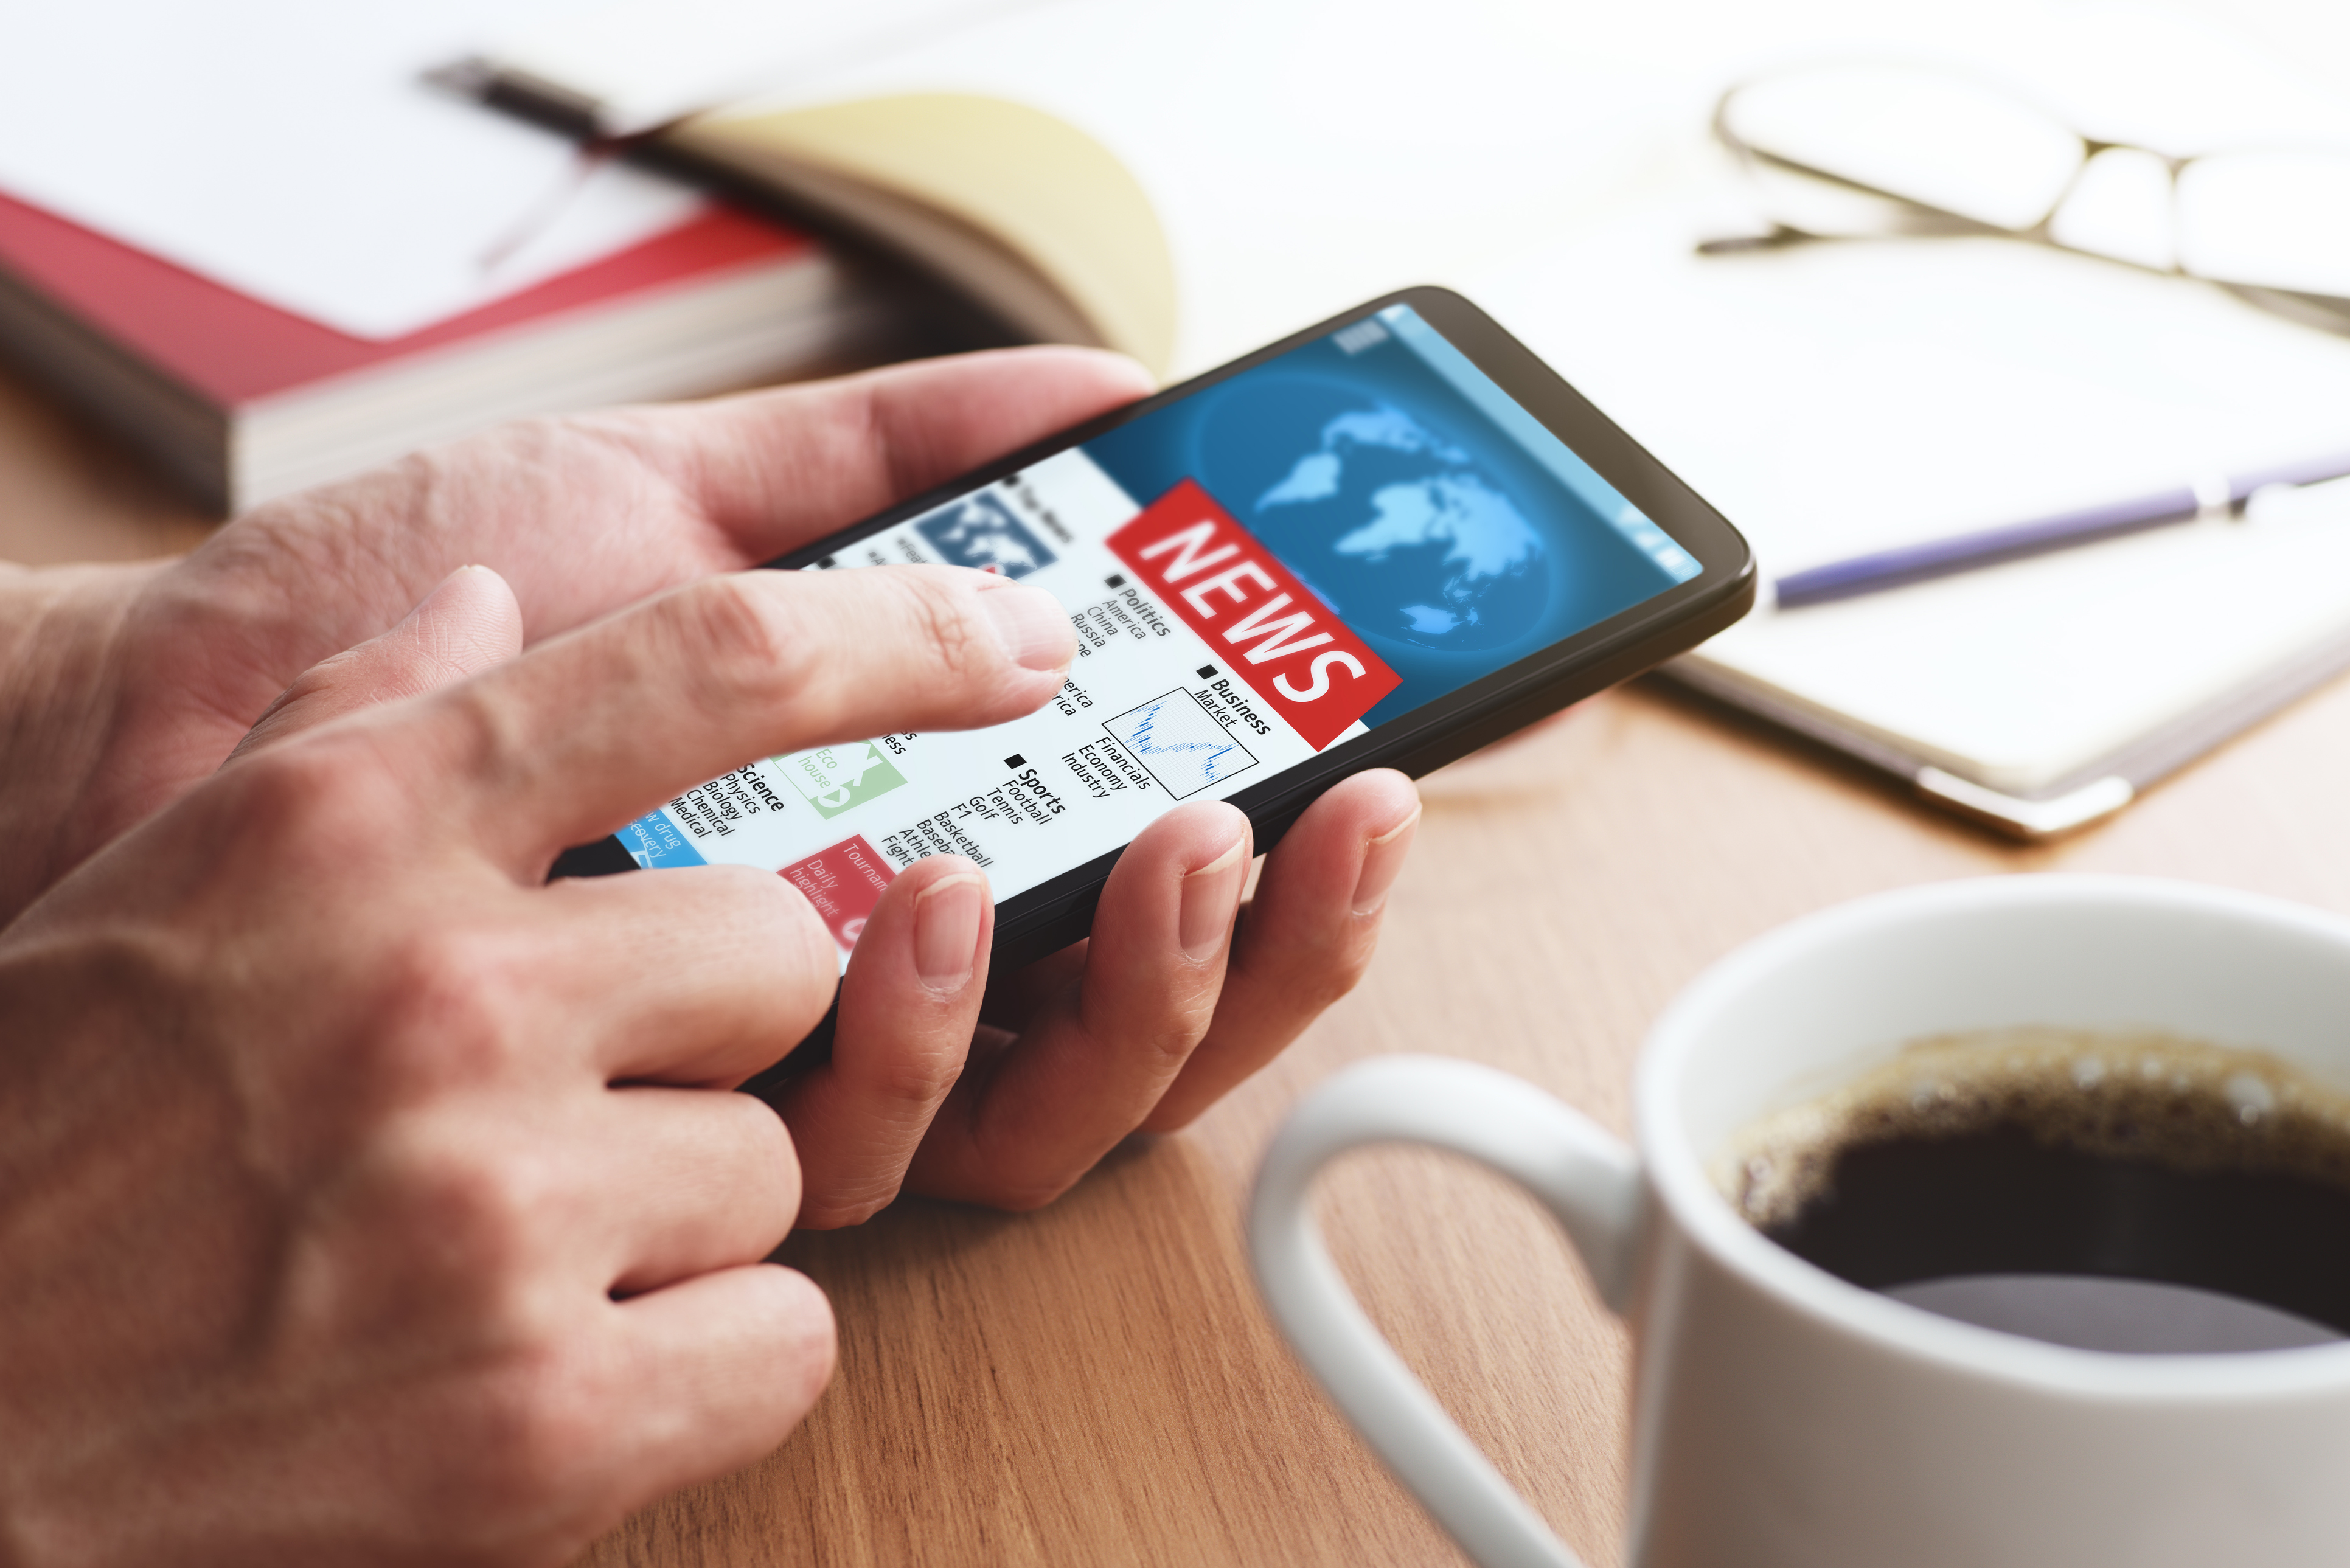 A close-up image of a hand holding a mobile phone, with the words "News," "Business," Politics" and "Sports" visible on the screen. Next to the phone is a cup of coffee. In the background are blurred open books.